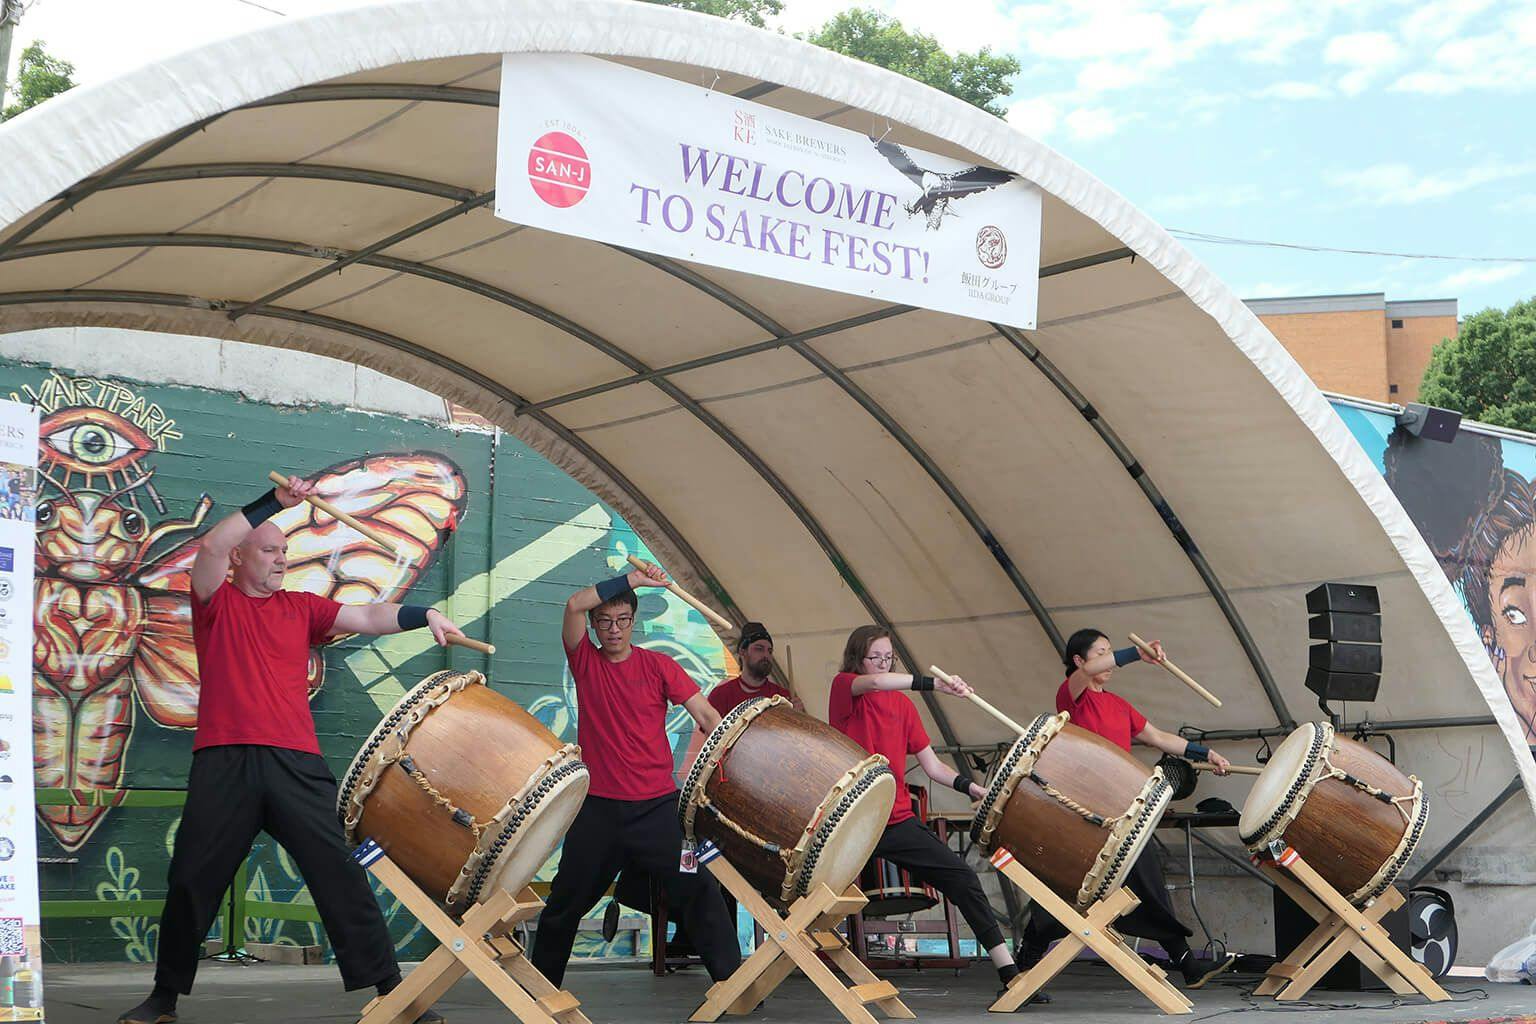 A taiko drum performance injects a rousing spirit into the afternoon